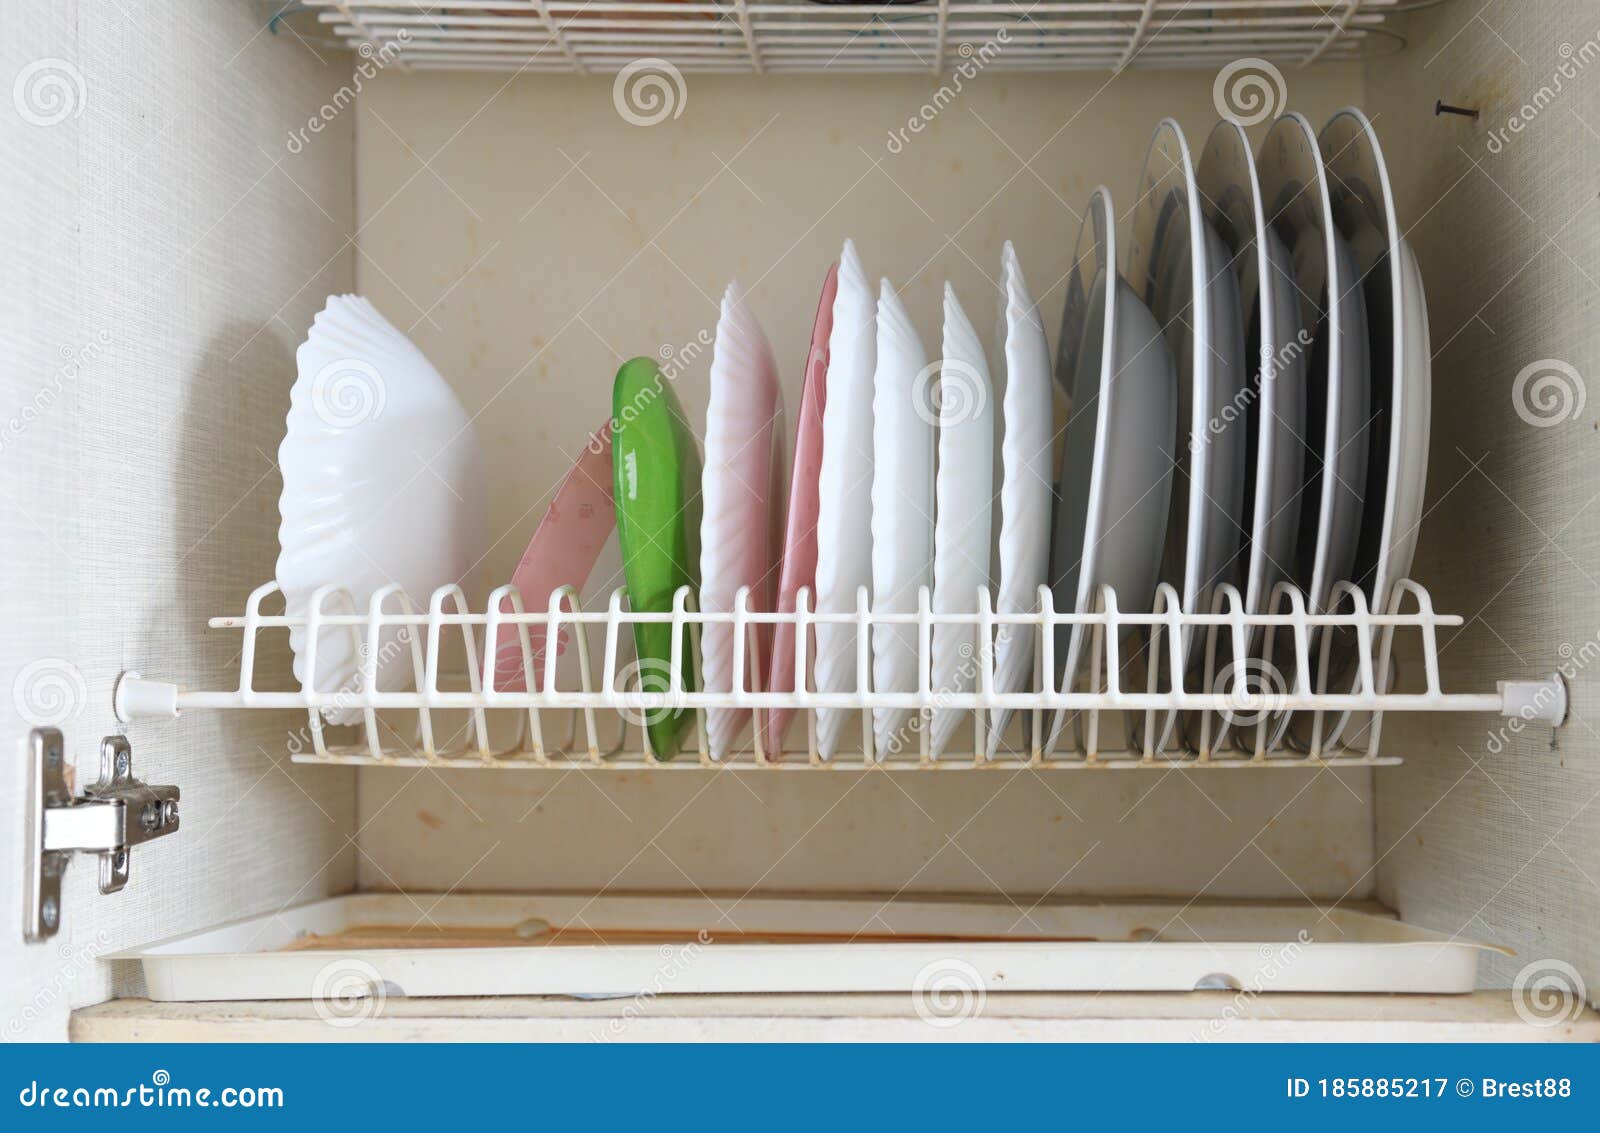 Dish Drying On A Metal Dish Rack In A Kitchen Cabinet Stock Image Image Of Drying